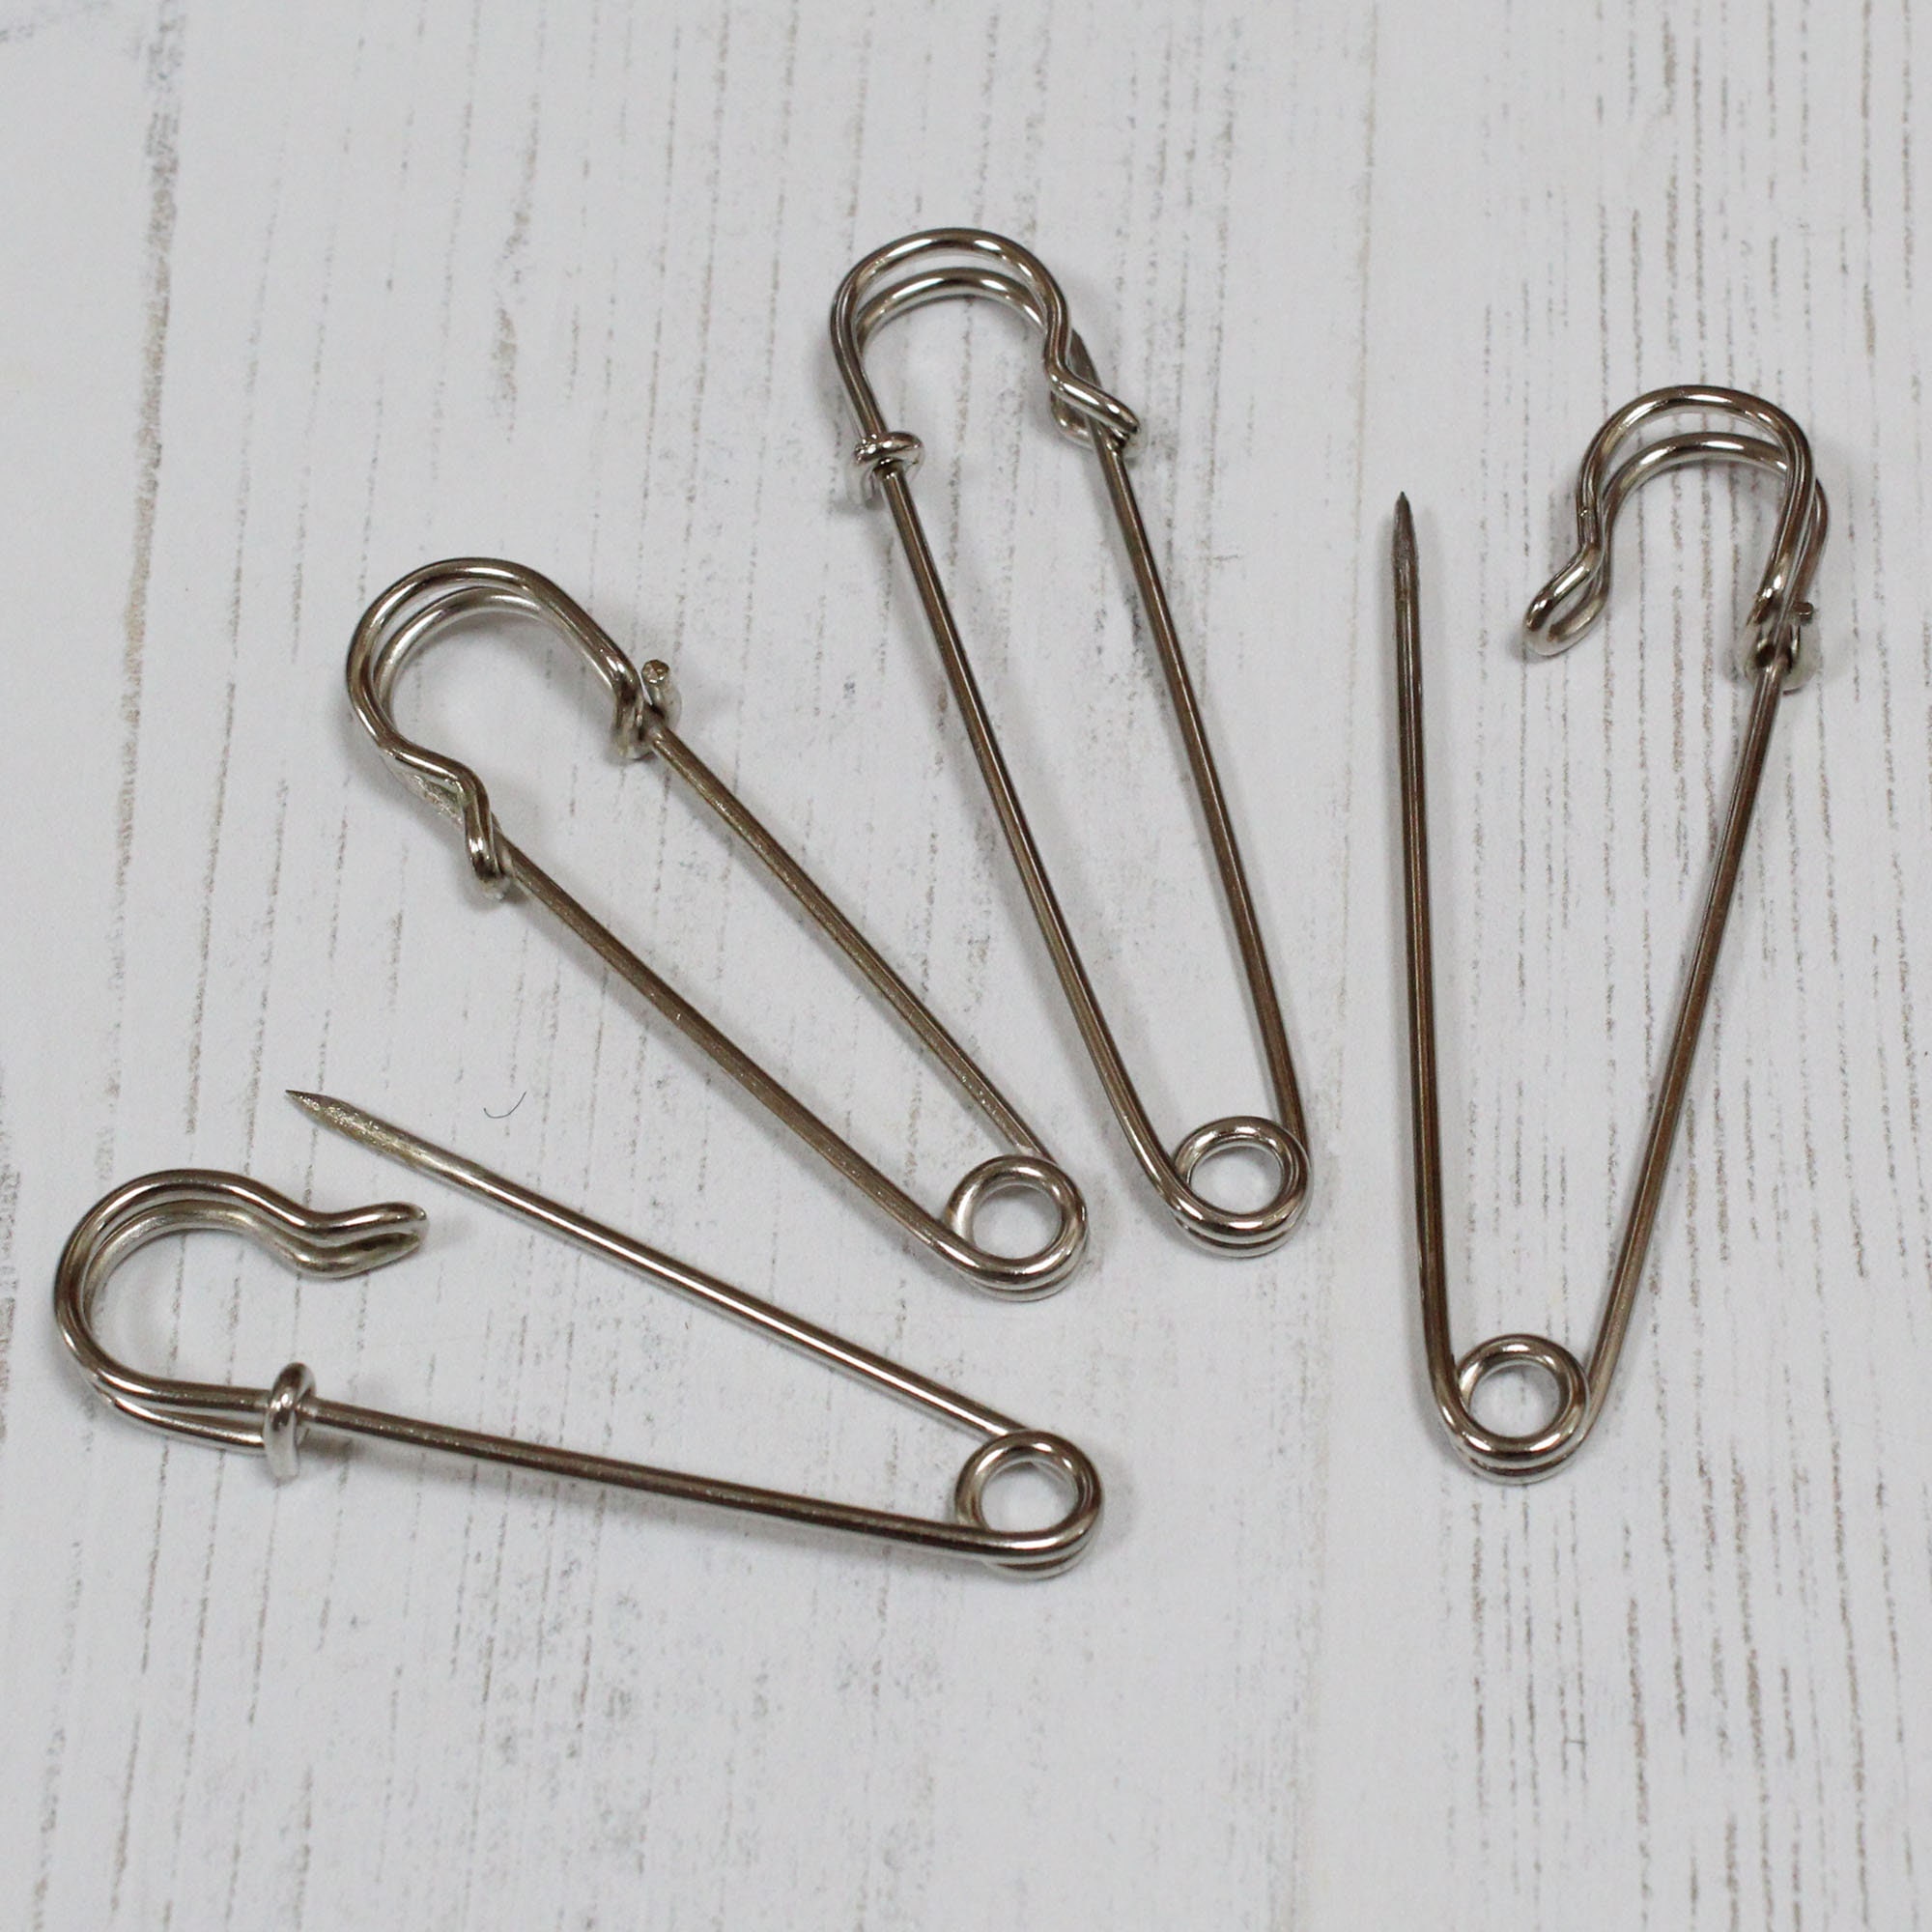 Large Safety Kilt Skirt Blanket Shawl Pins Silver and Gold - Etsy